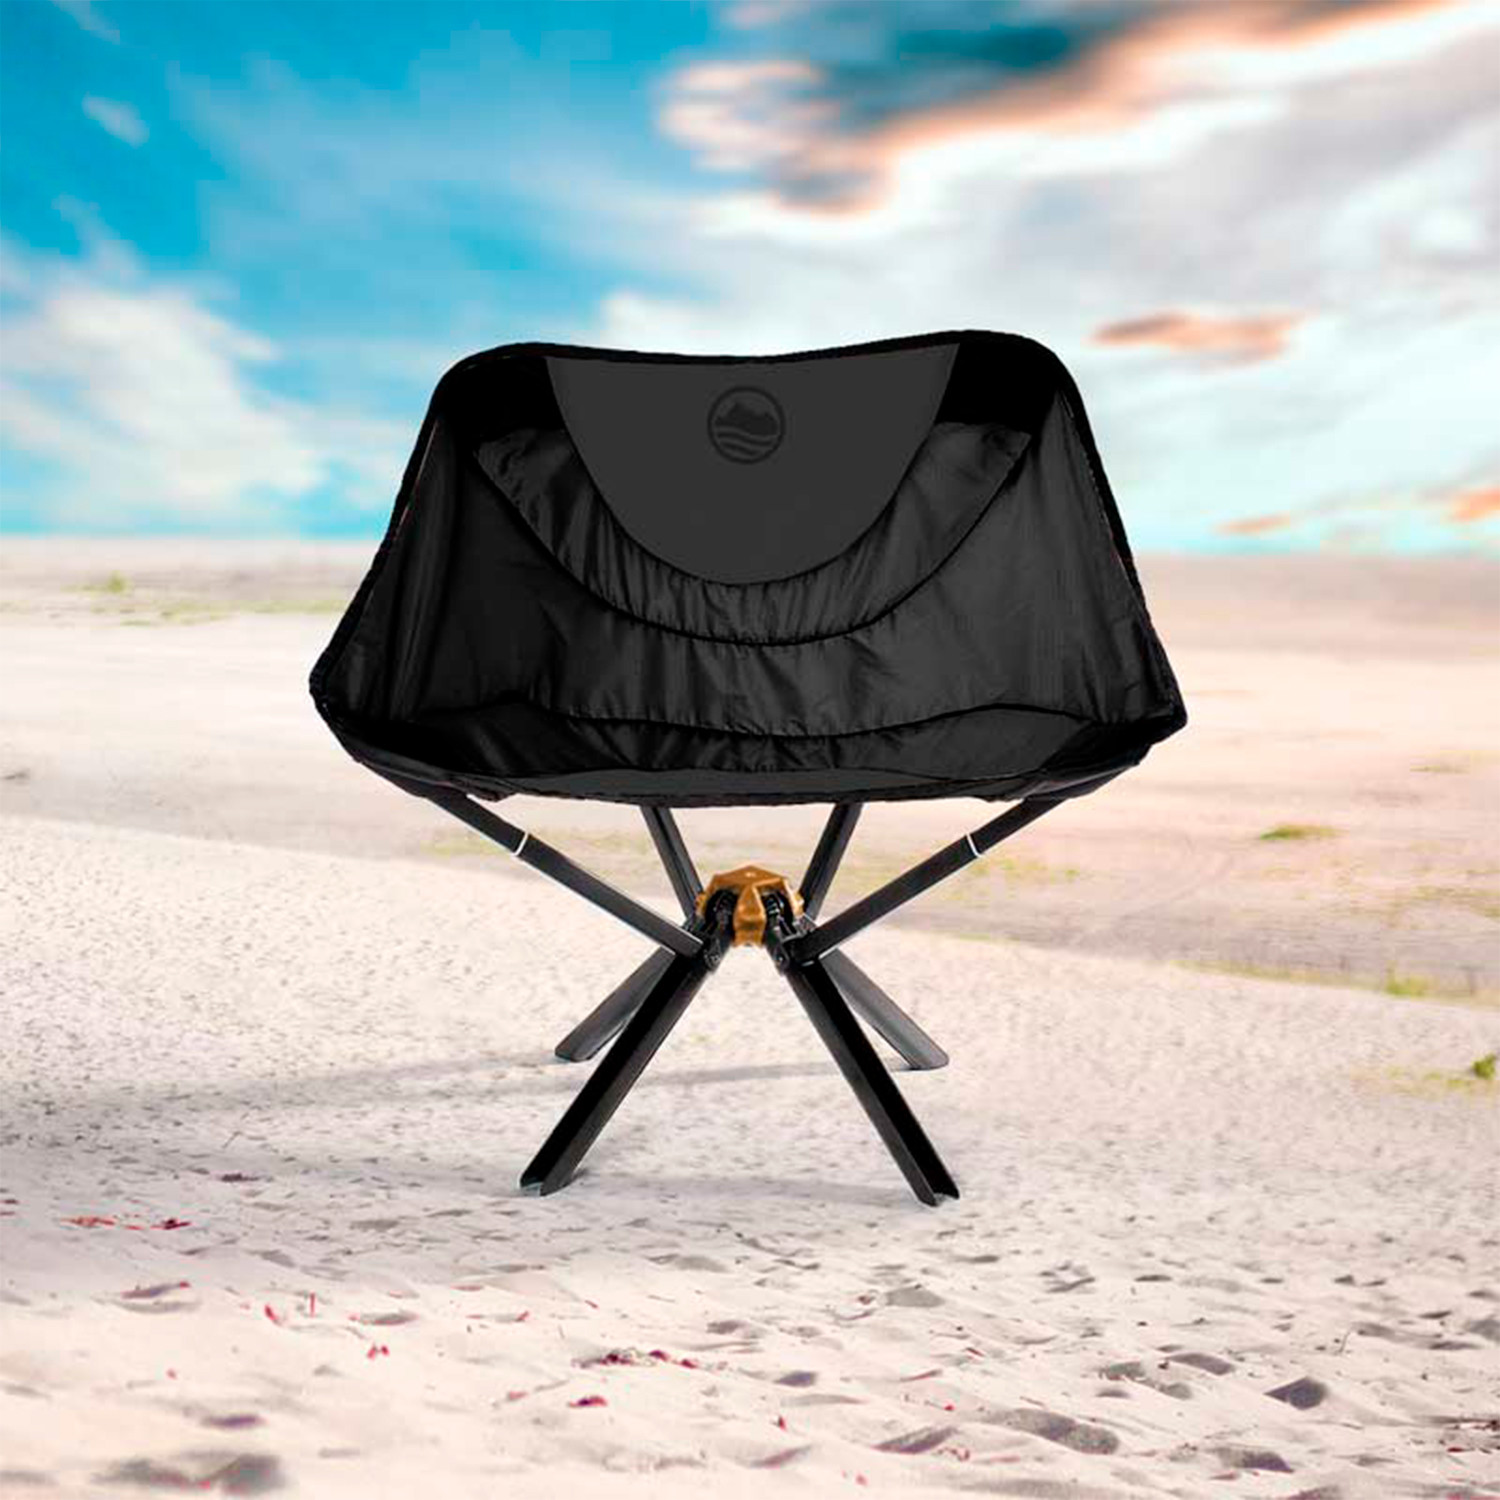 Cliq Products This Portable Chair Is Engineered For Quality Milled